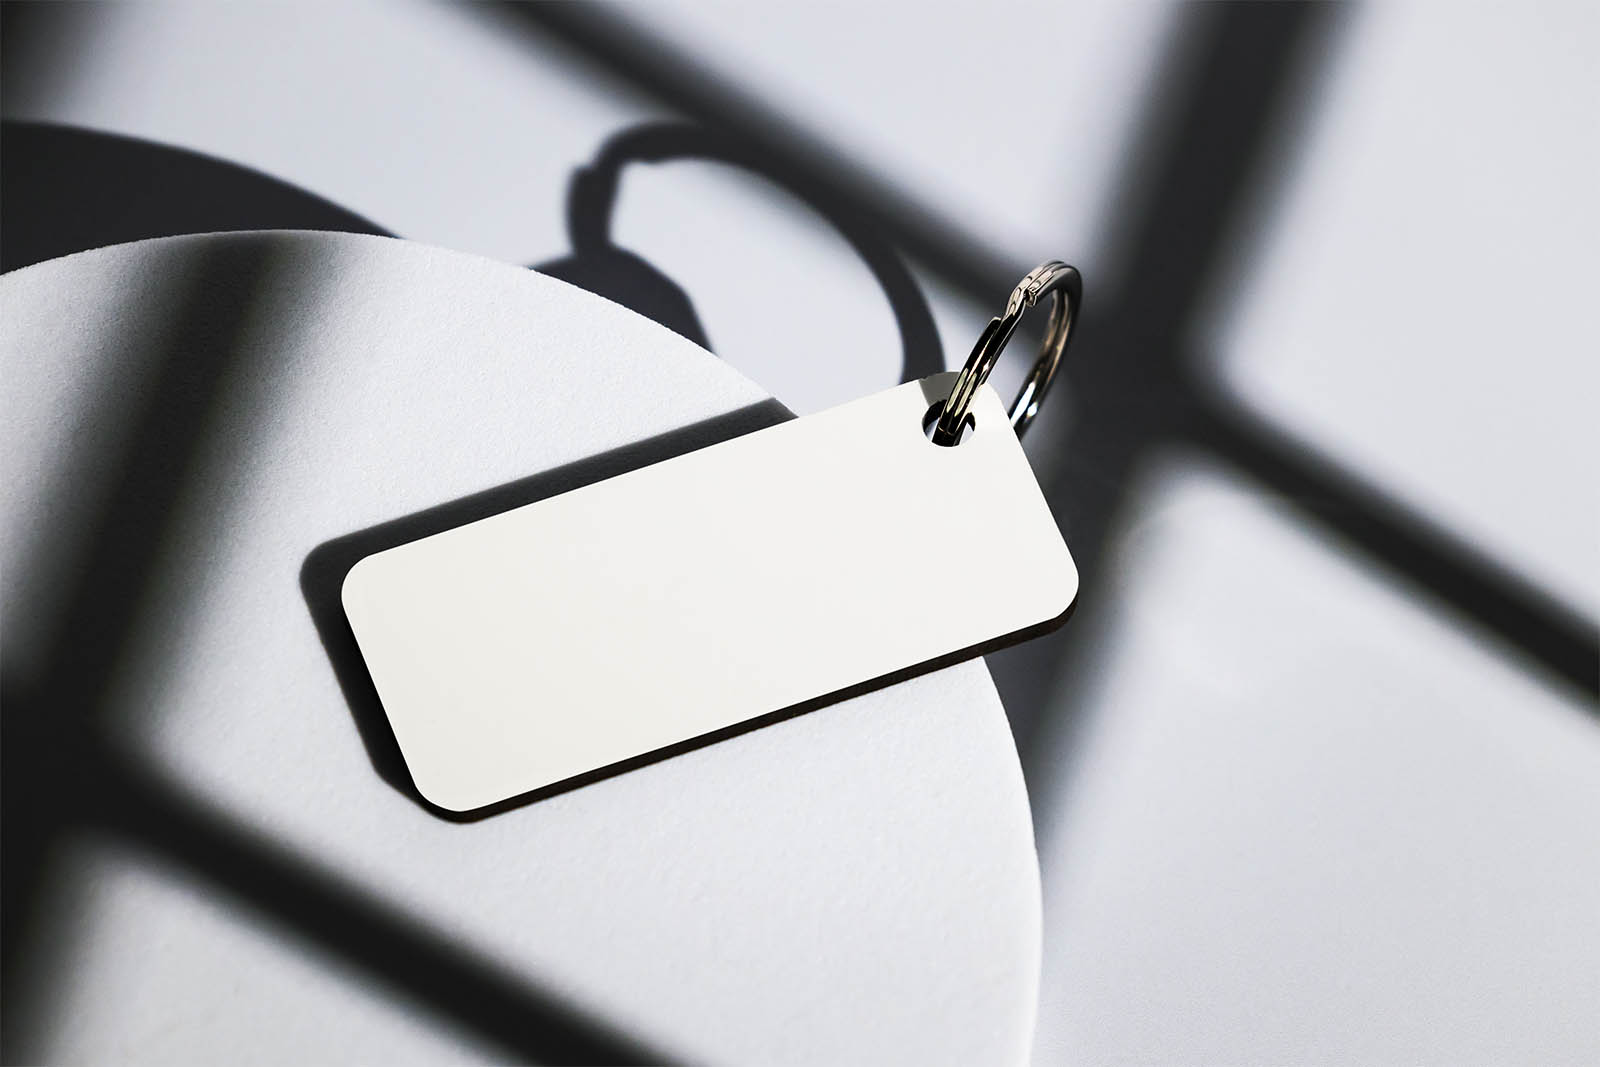 Key ring with abstract background mockup